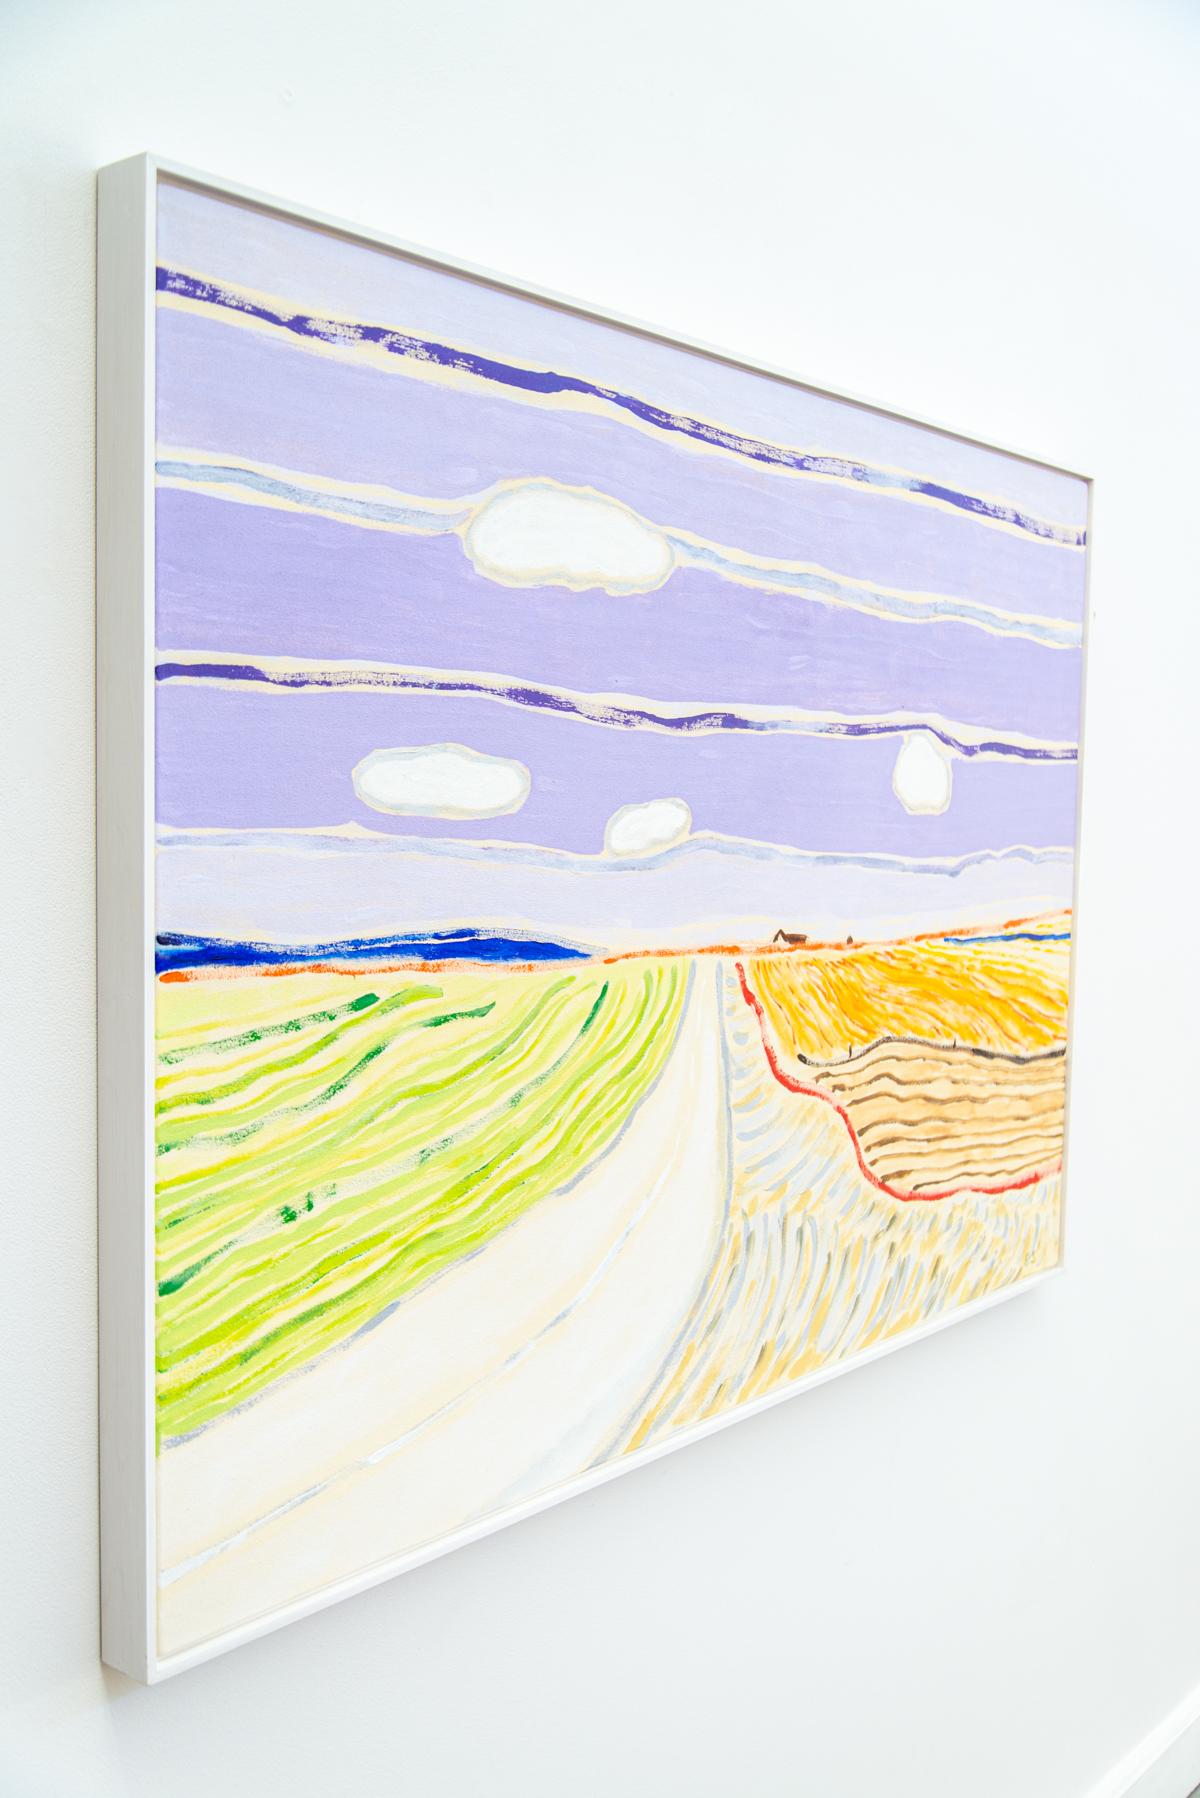 Pat Service has captured the big sky and wide-open spaces of the prairie in this charming colourful landscape. Reminiscent of Van Gogh’s form and palette, the mauve sky, green, orange, and yellow crops span either side of a road that disappears into